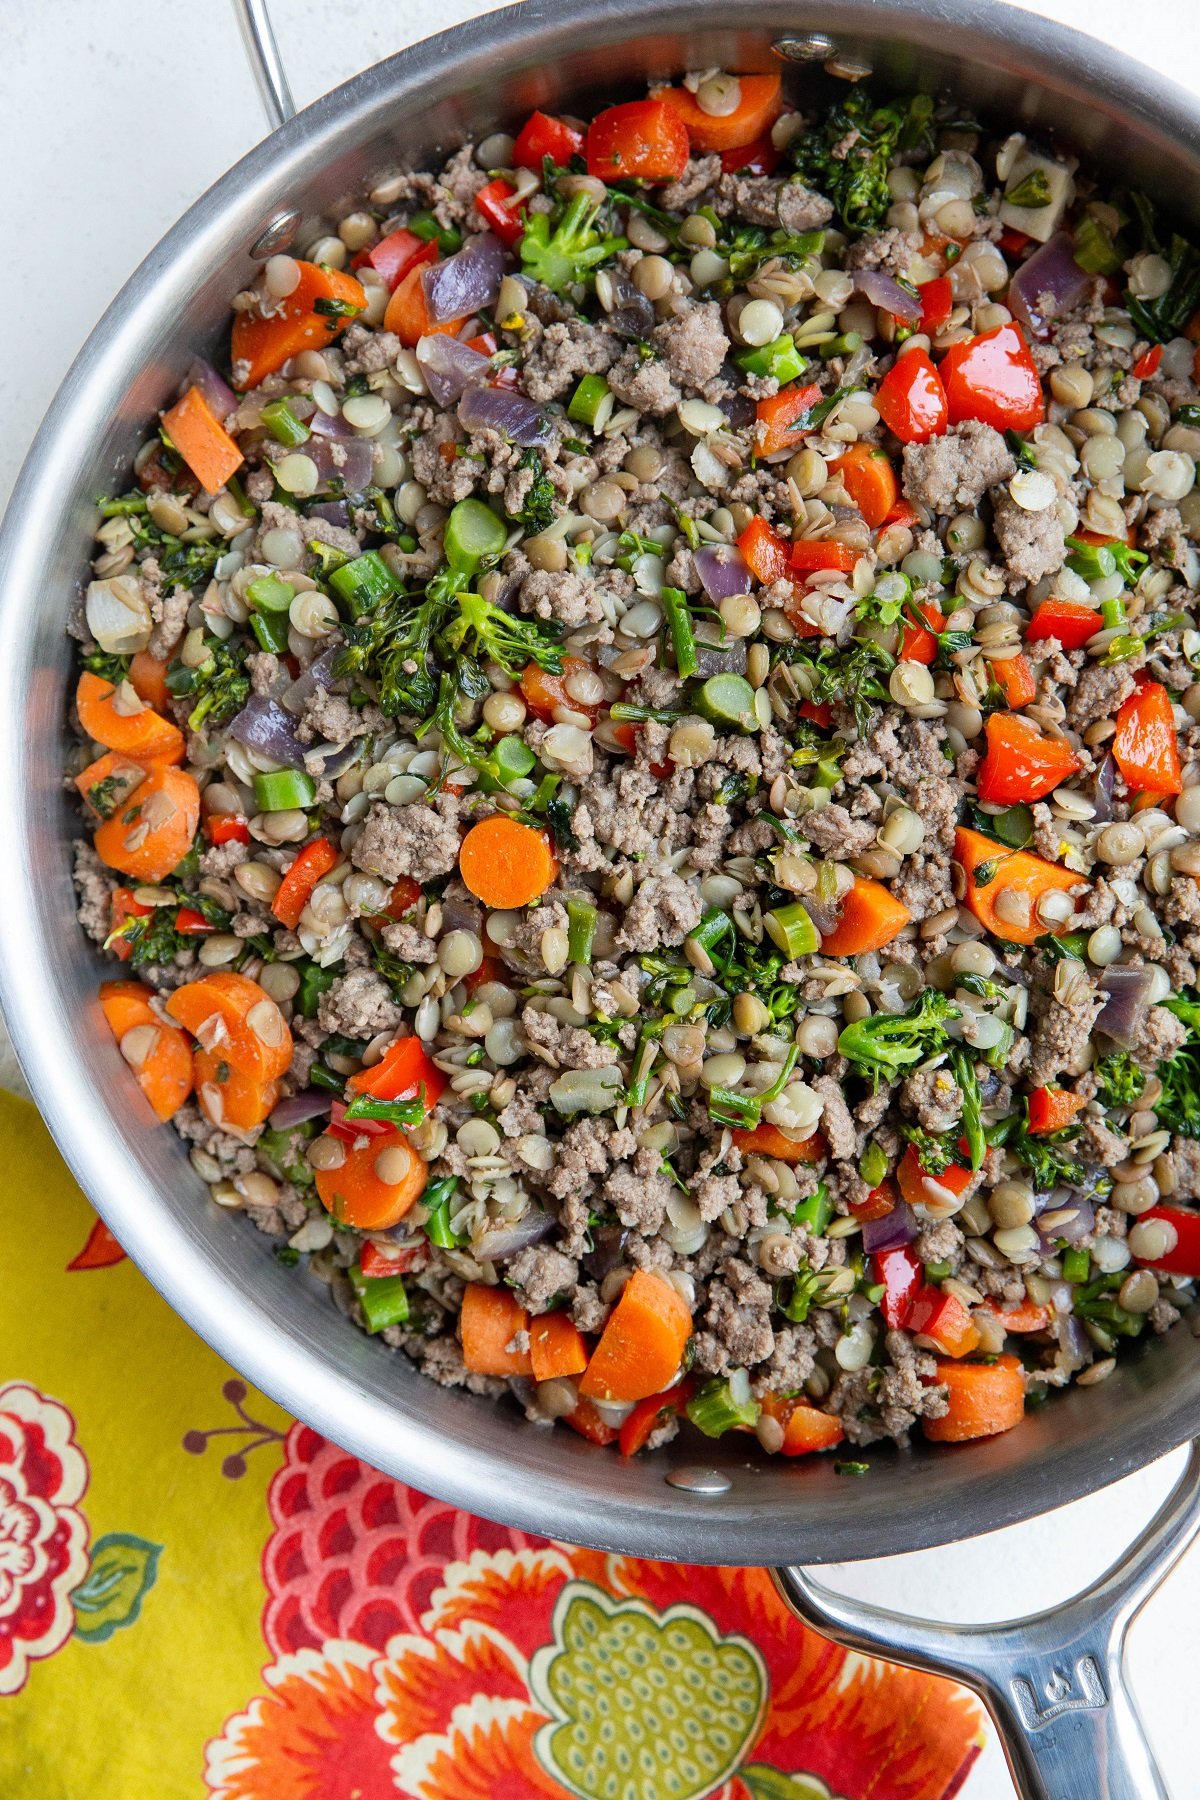 Ground beef, lentils, and vegetables in a stainless steel skillet with a napkin to the side.